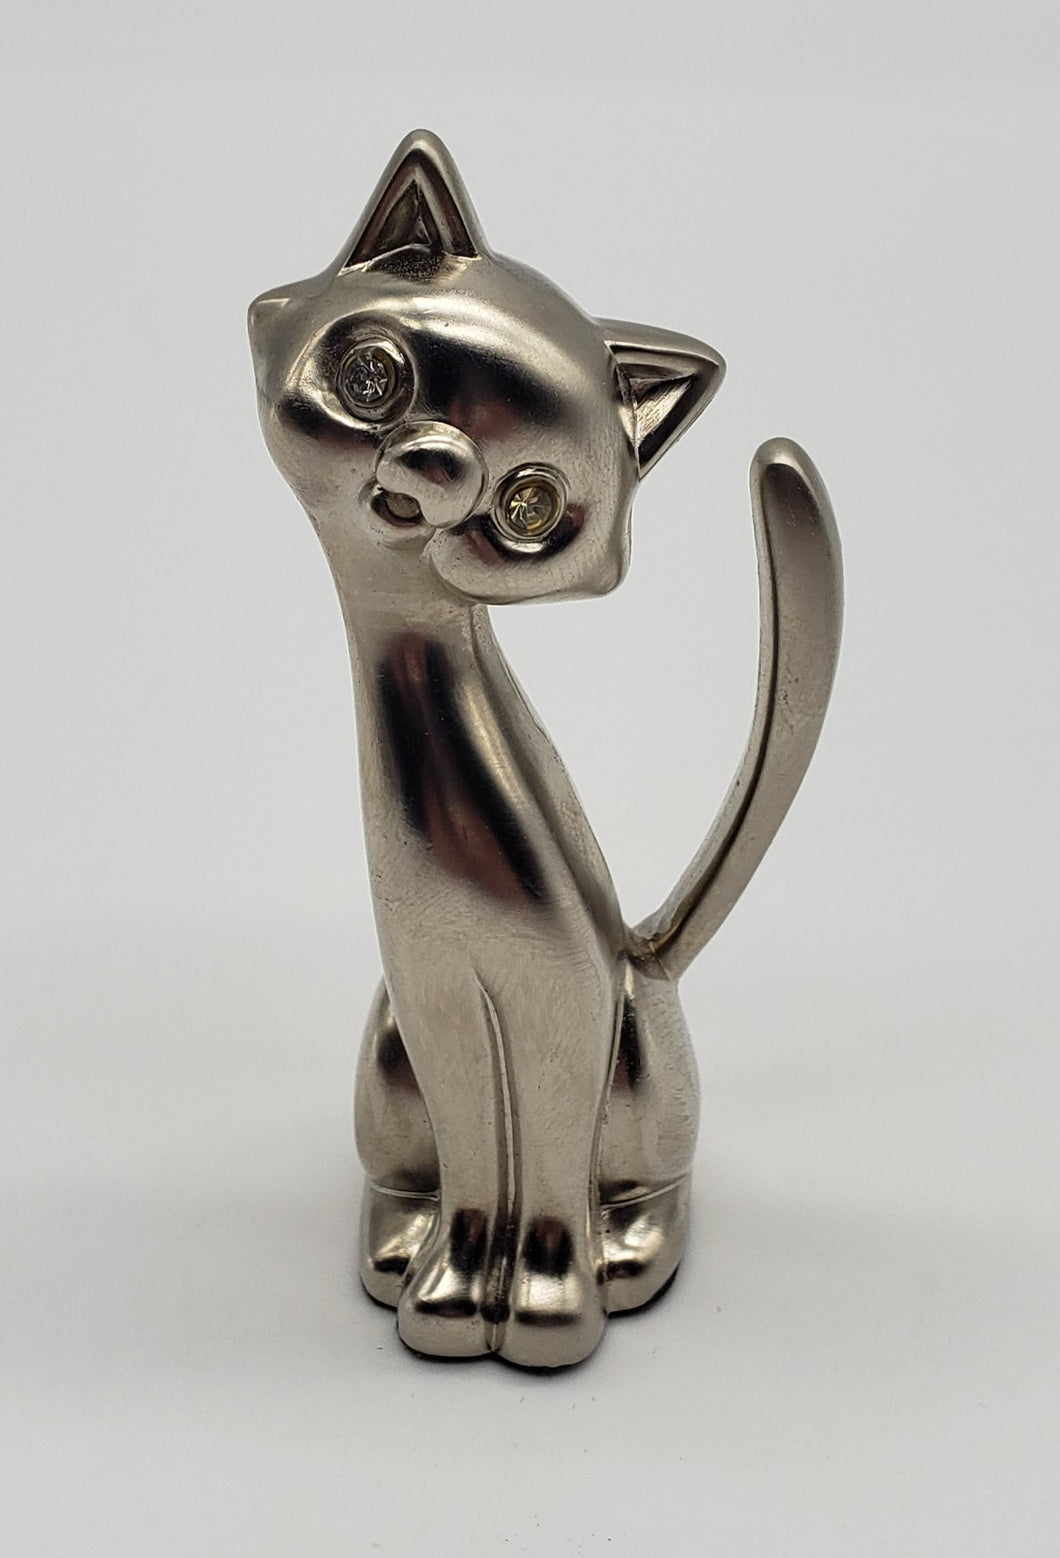 Pewter ring holder small cat